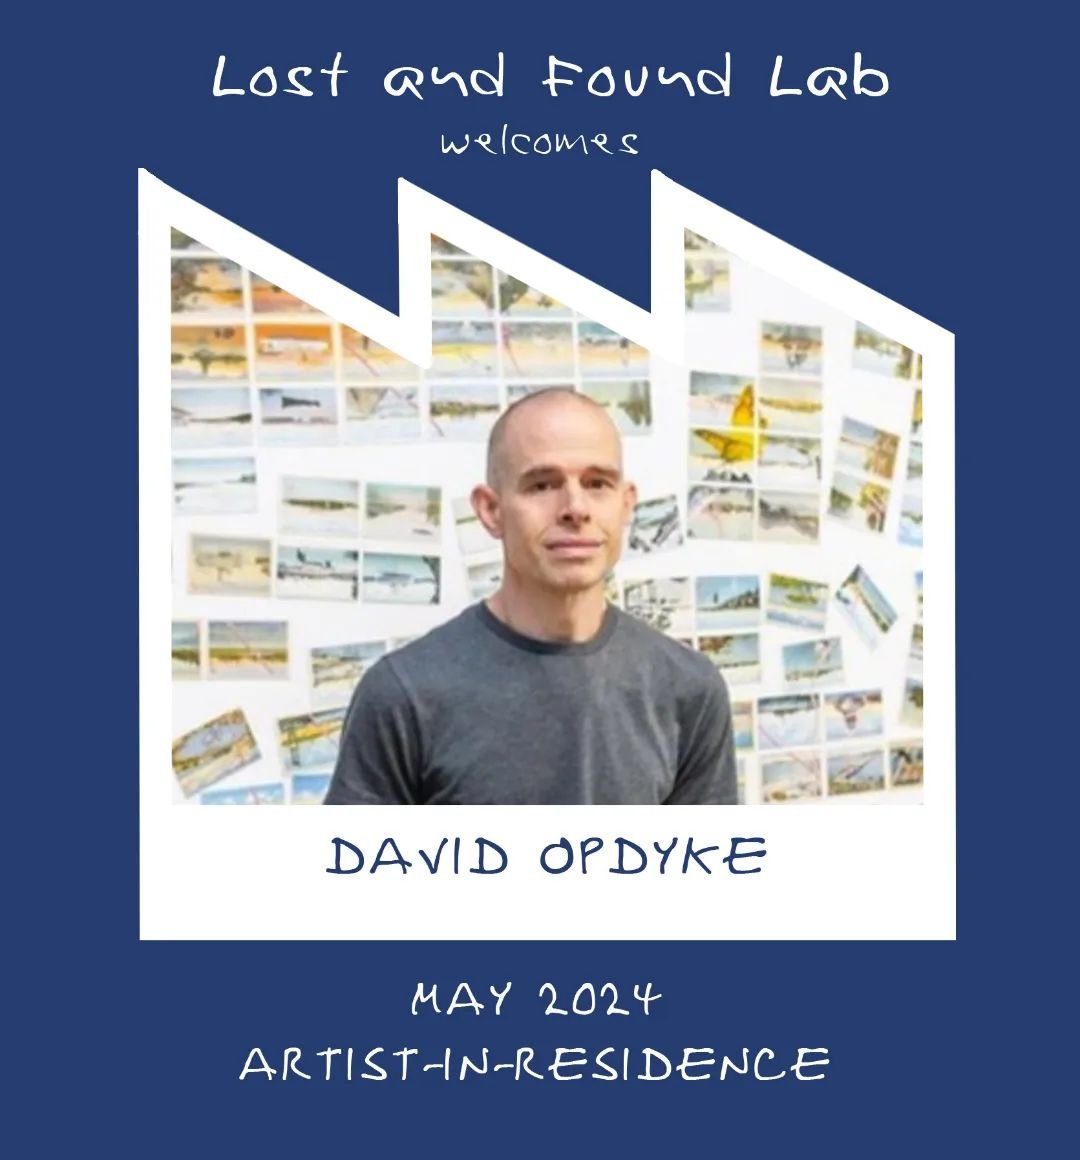 The Lost and Found Lab is pleased to welcome David Opdyke @david.opdyke as our May Artist-in Residence. David&rsquo;s artwork explores globalization, consumerism, and civilization&rsquo;s abusive relationship with the environment.&nbsp;A draughtsman,